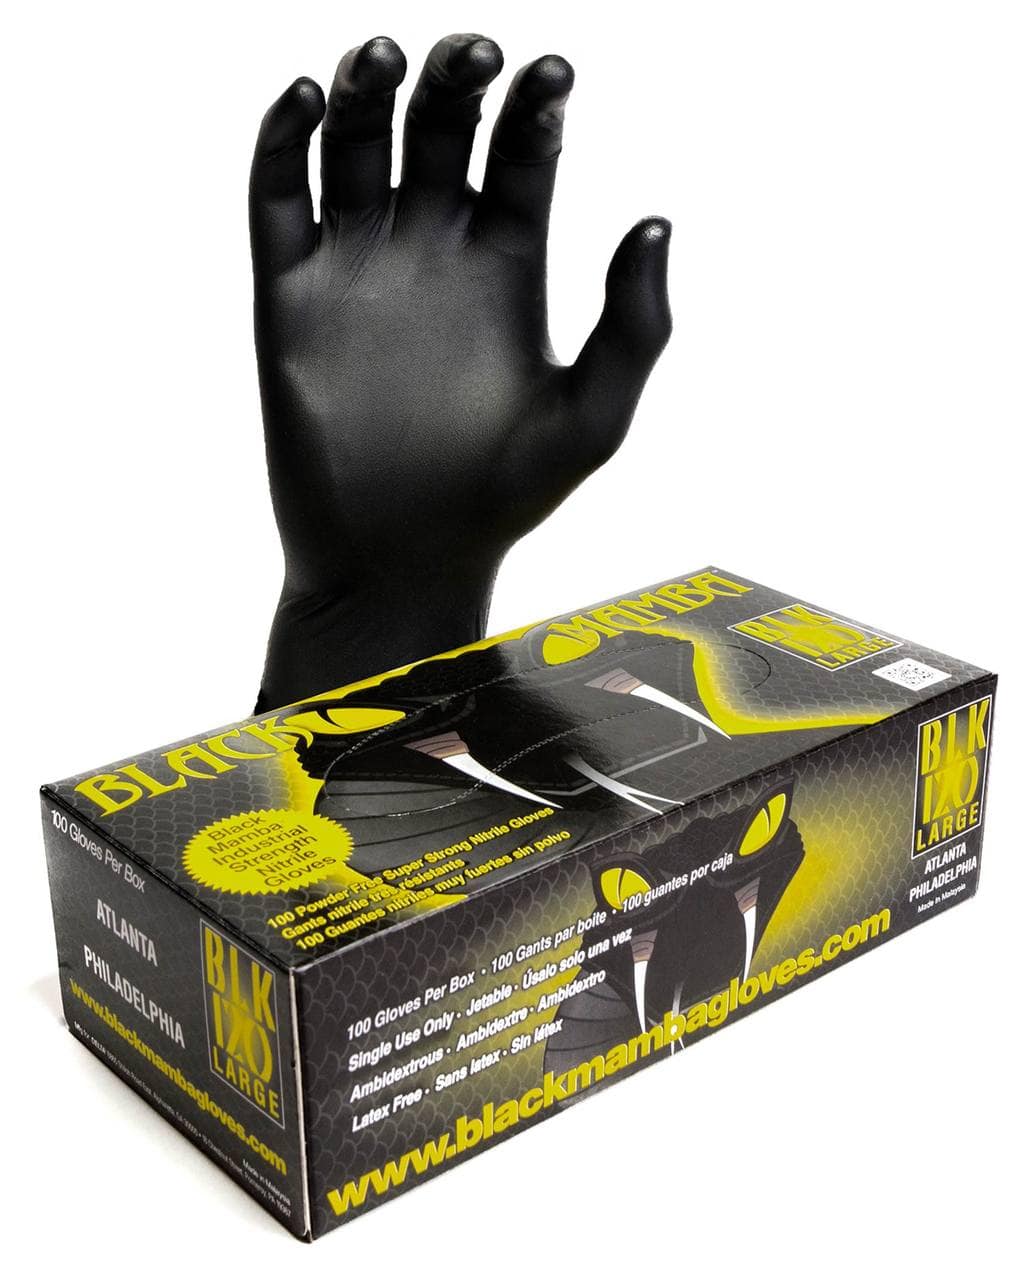 XL Black Mamba Super Strong Heavy Duty Disposable Nitrile Gloves pack of 100 